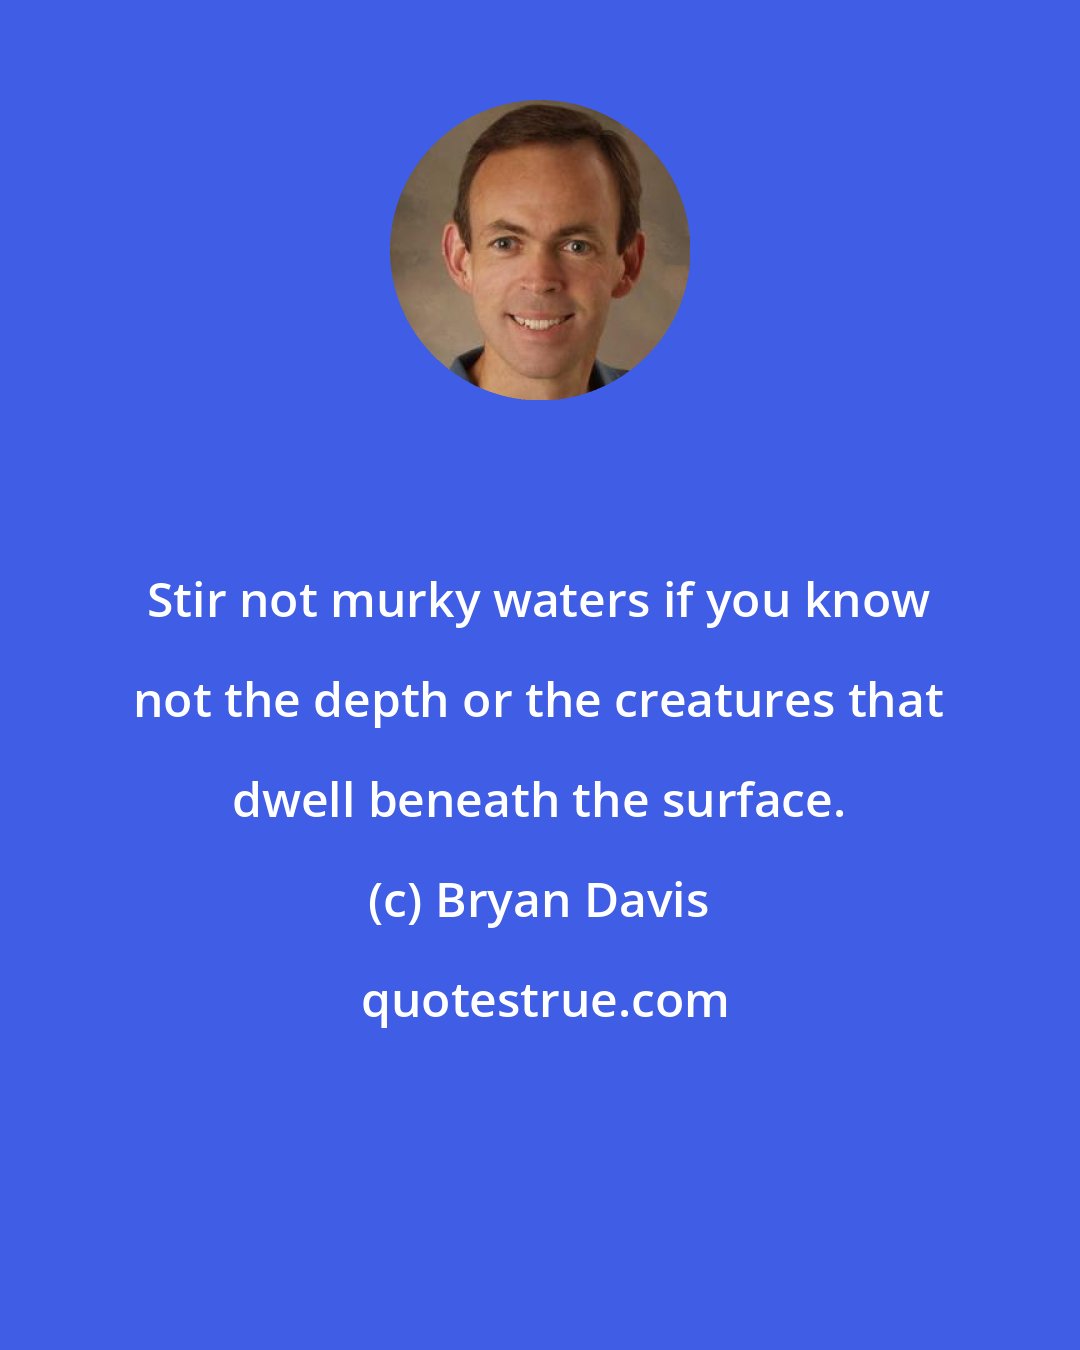 Bryan Davis: Stir not murky waters if you know not the depth or the creatures that dwell beneath the surface.